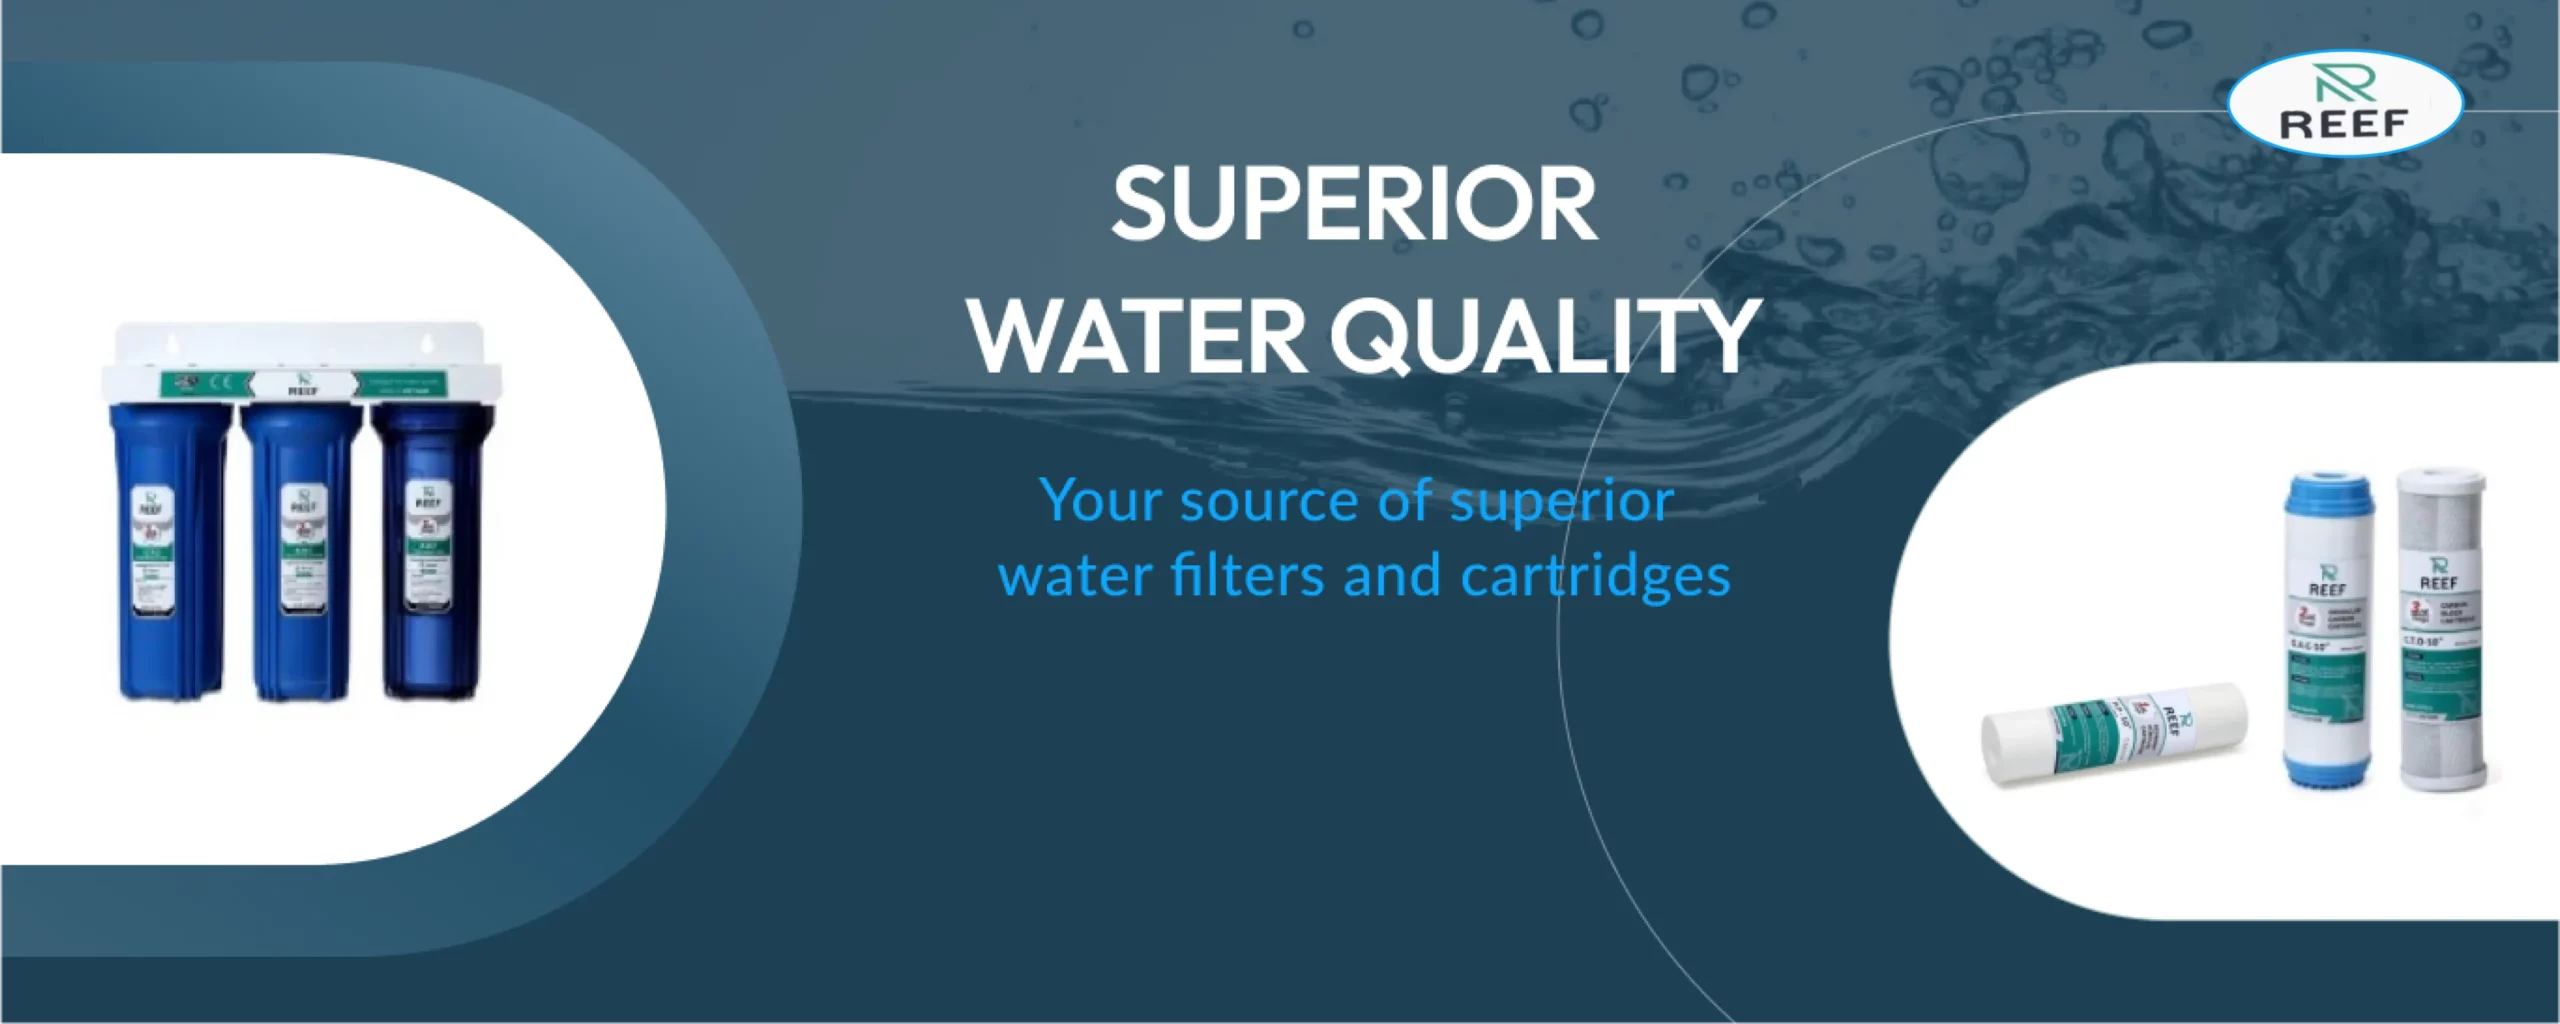 Water Filter and cartridges - Albirco